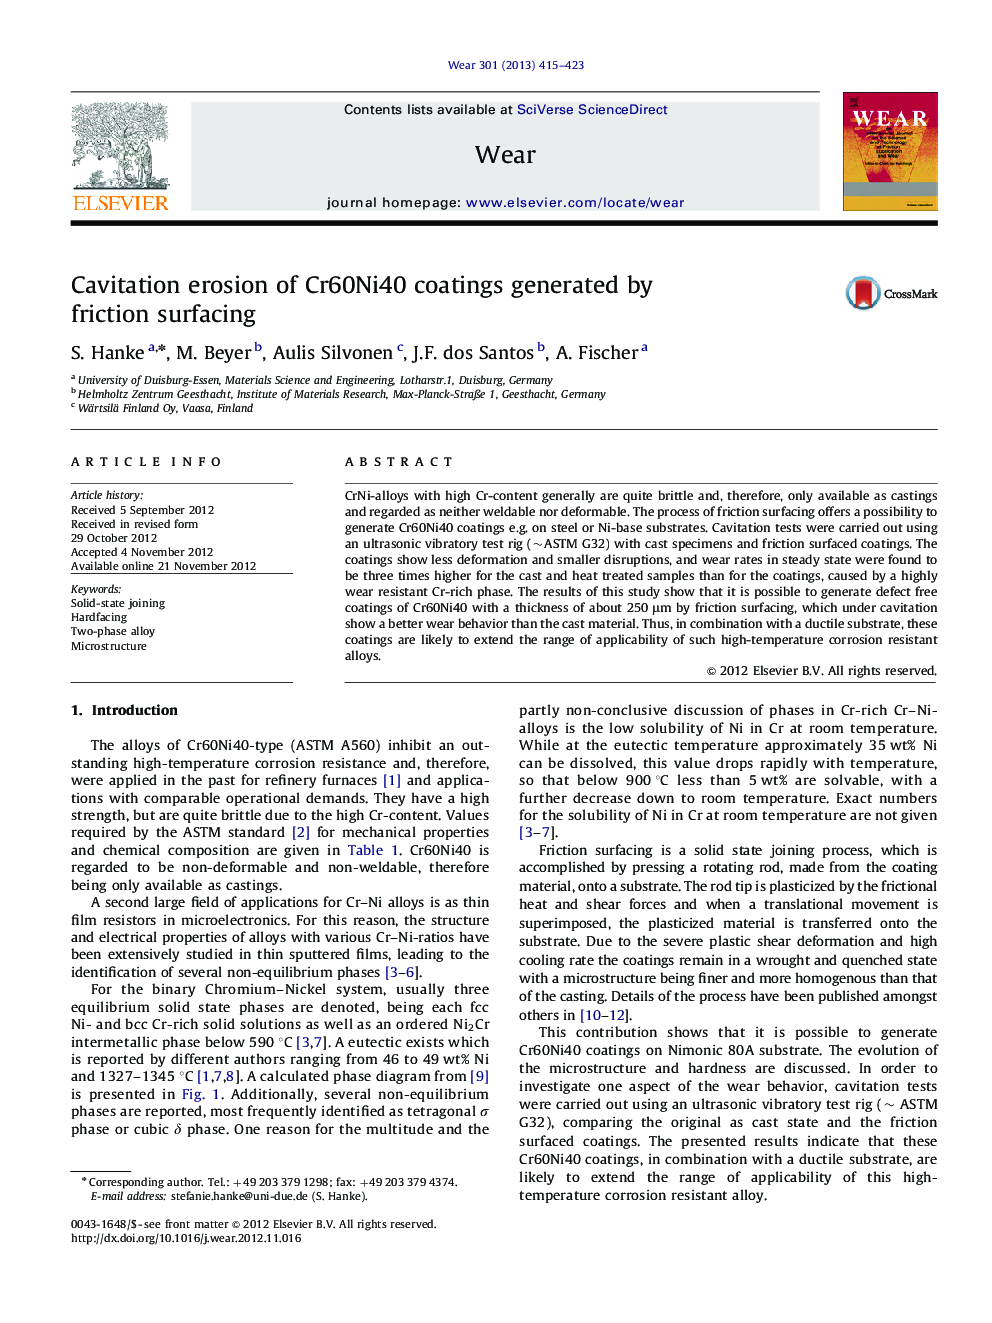 Cavitation erosion of Cr60Ni40 coatings generated by friction surfacing